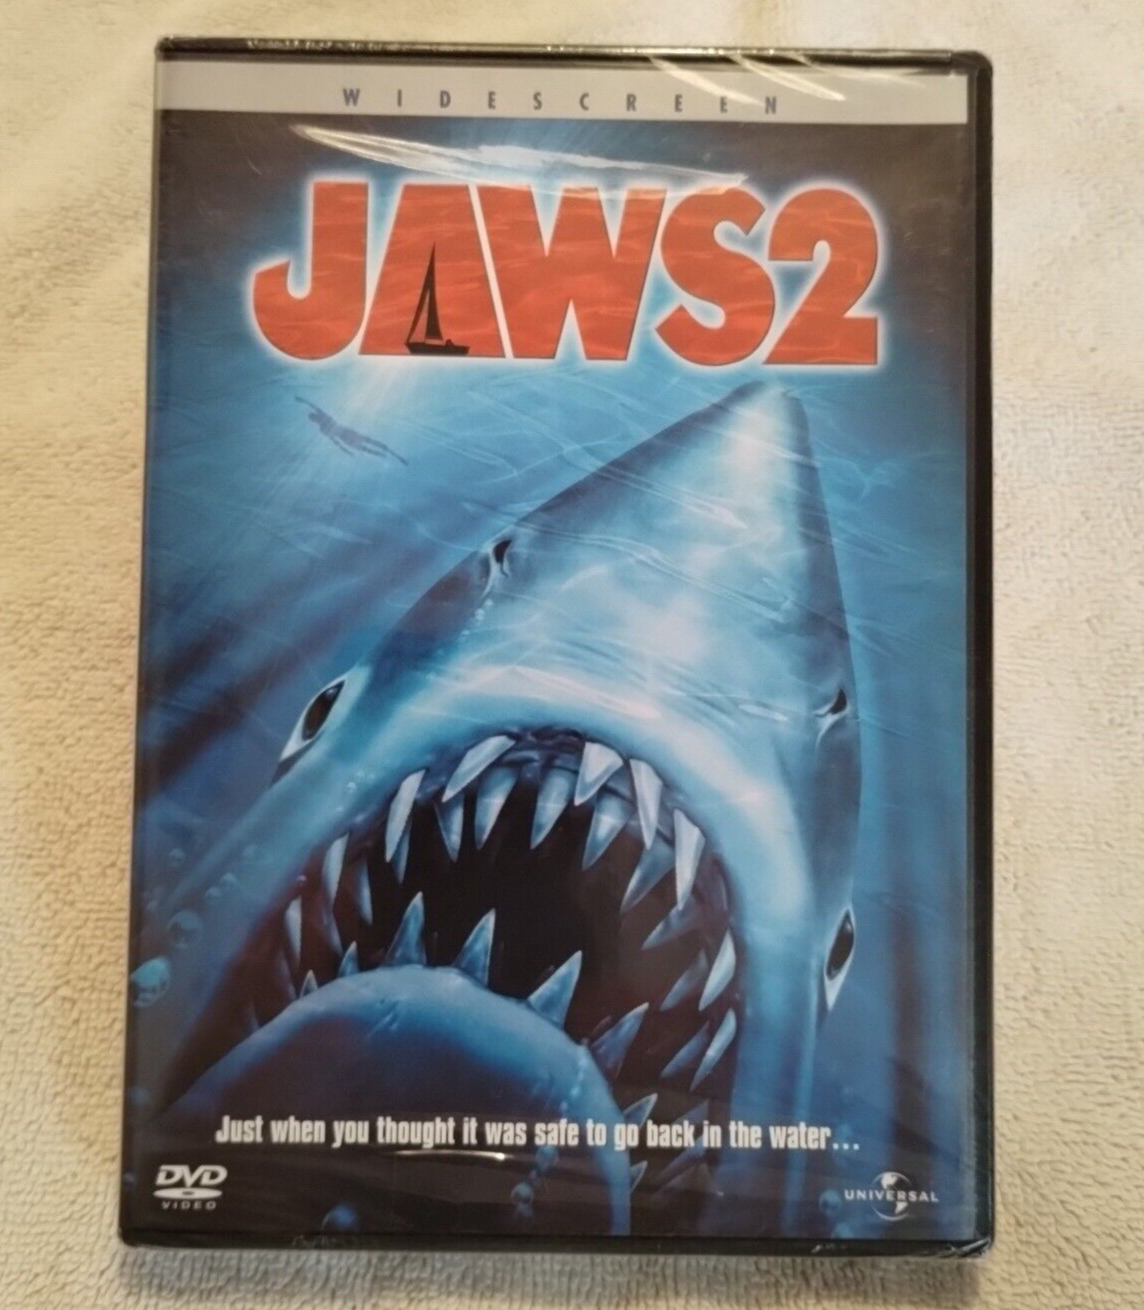 Jaws 2 (DVD) USA IMPORT